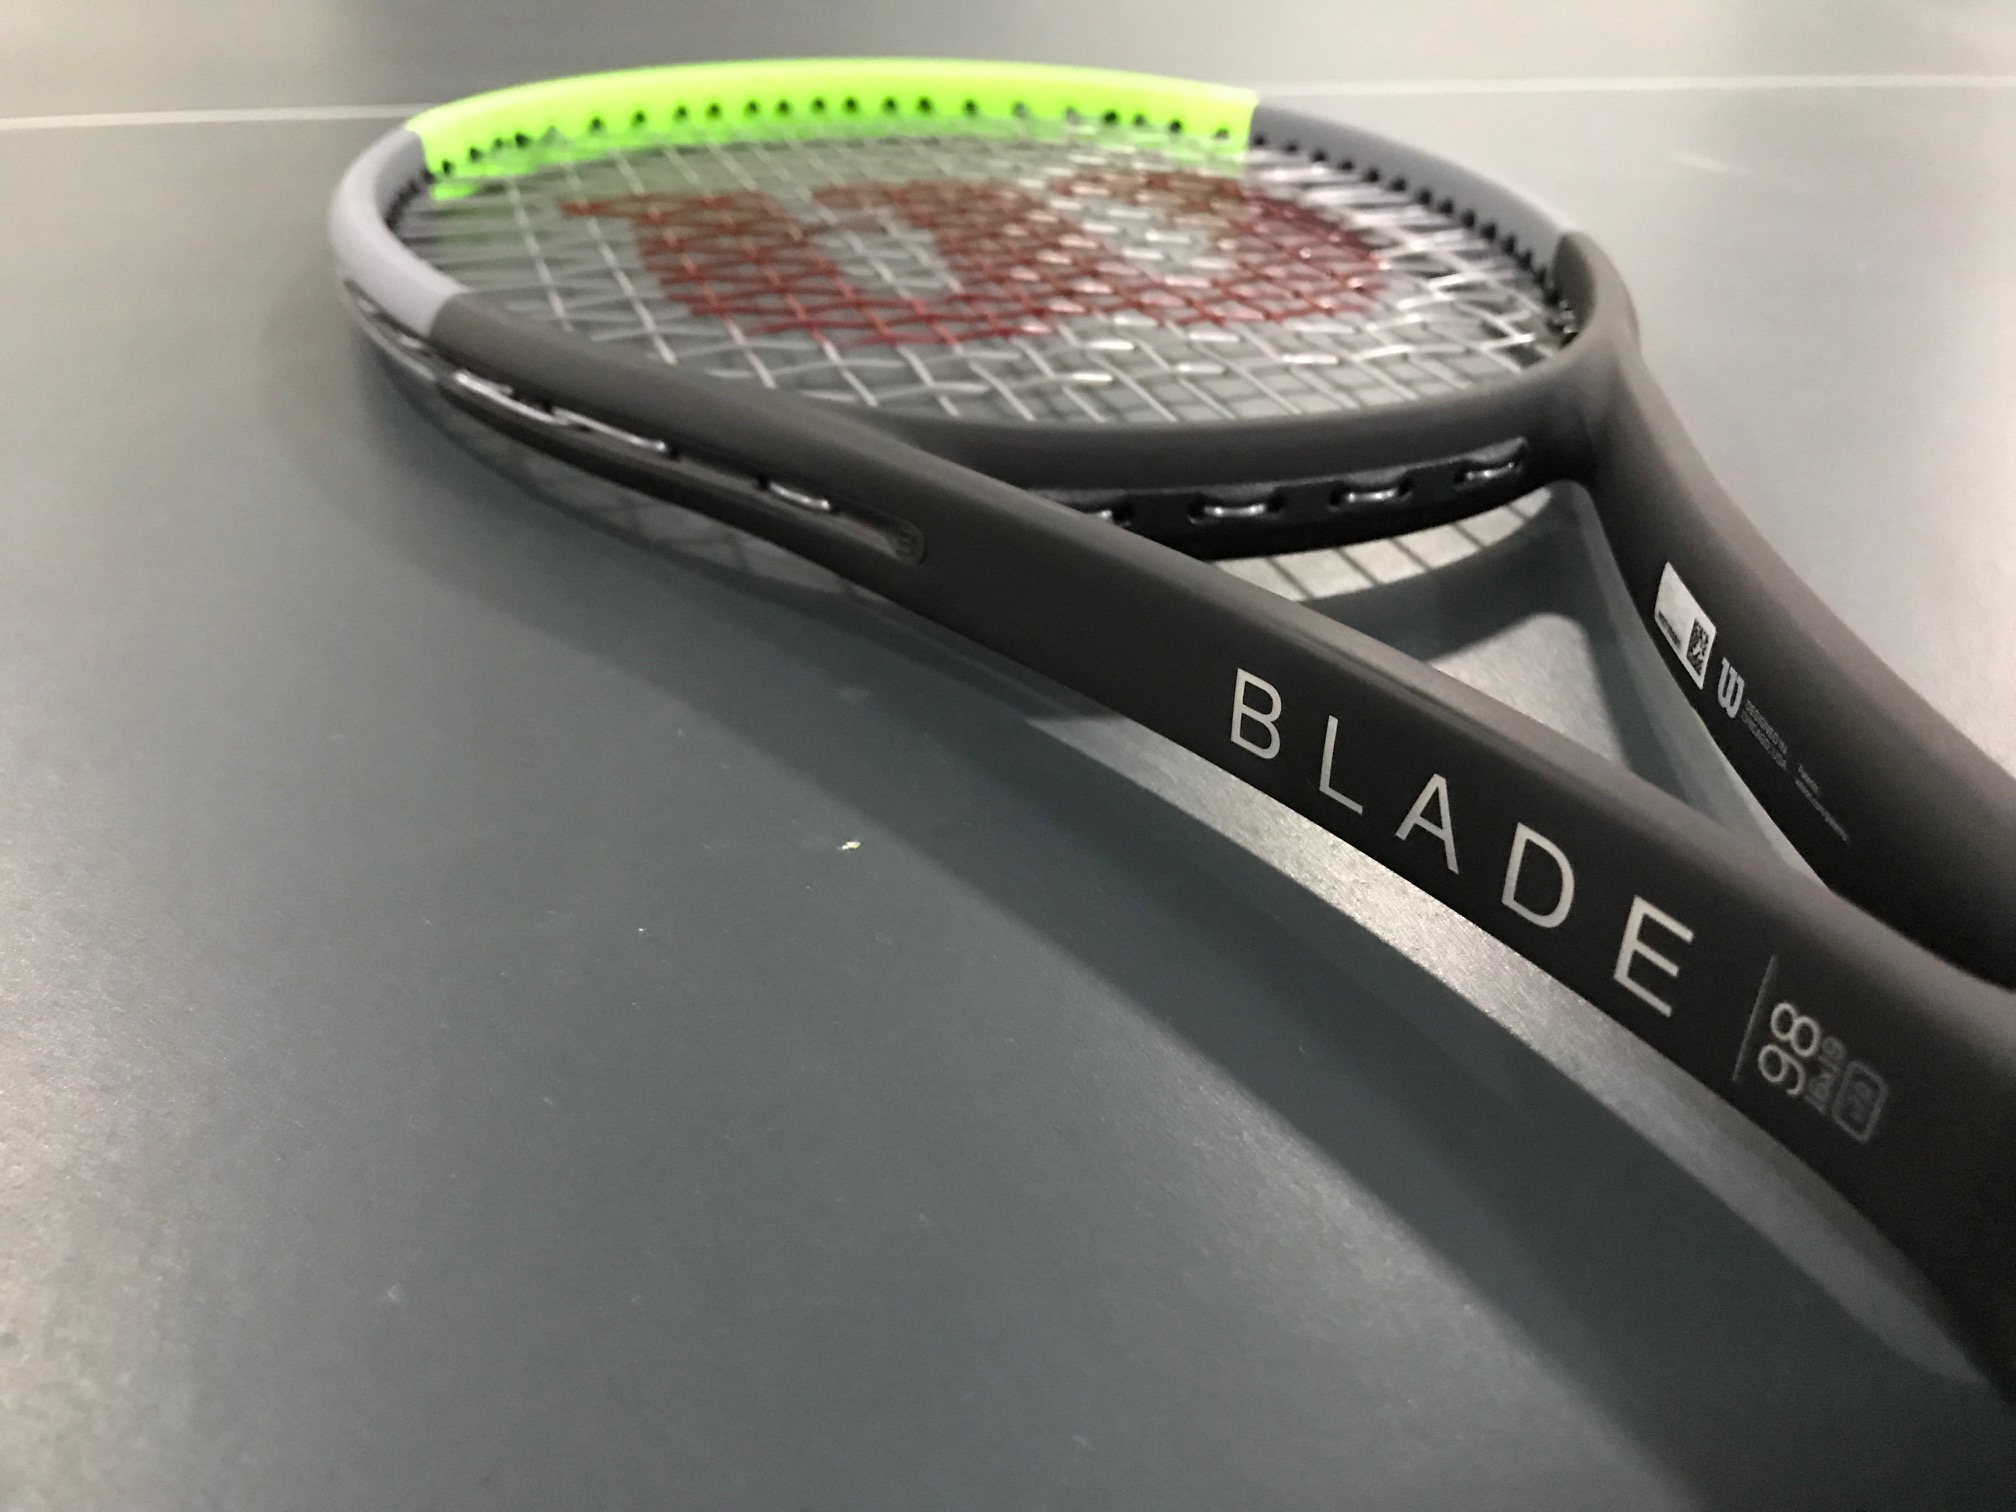 TENNIS RACKET Grip Size: 4 1/8, 1/4, 3/8 1/2" 18X20 Details about   NEW BLADE 98 PRO 